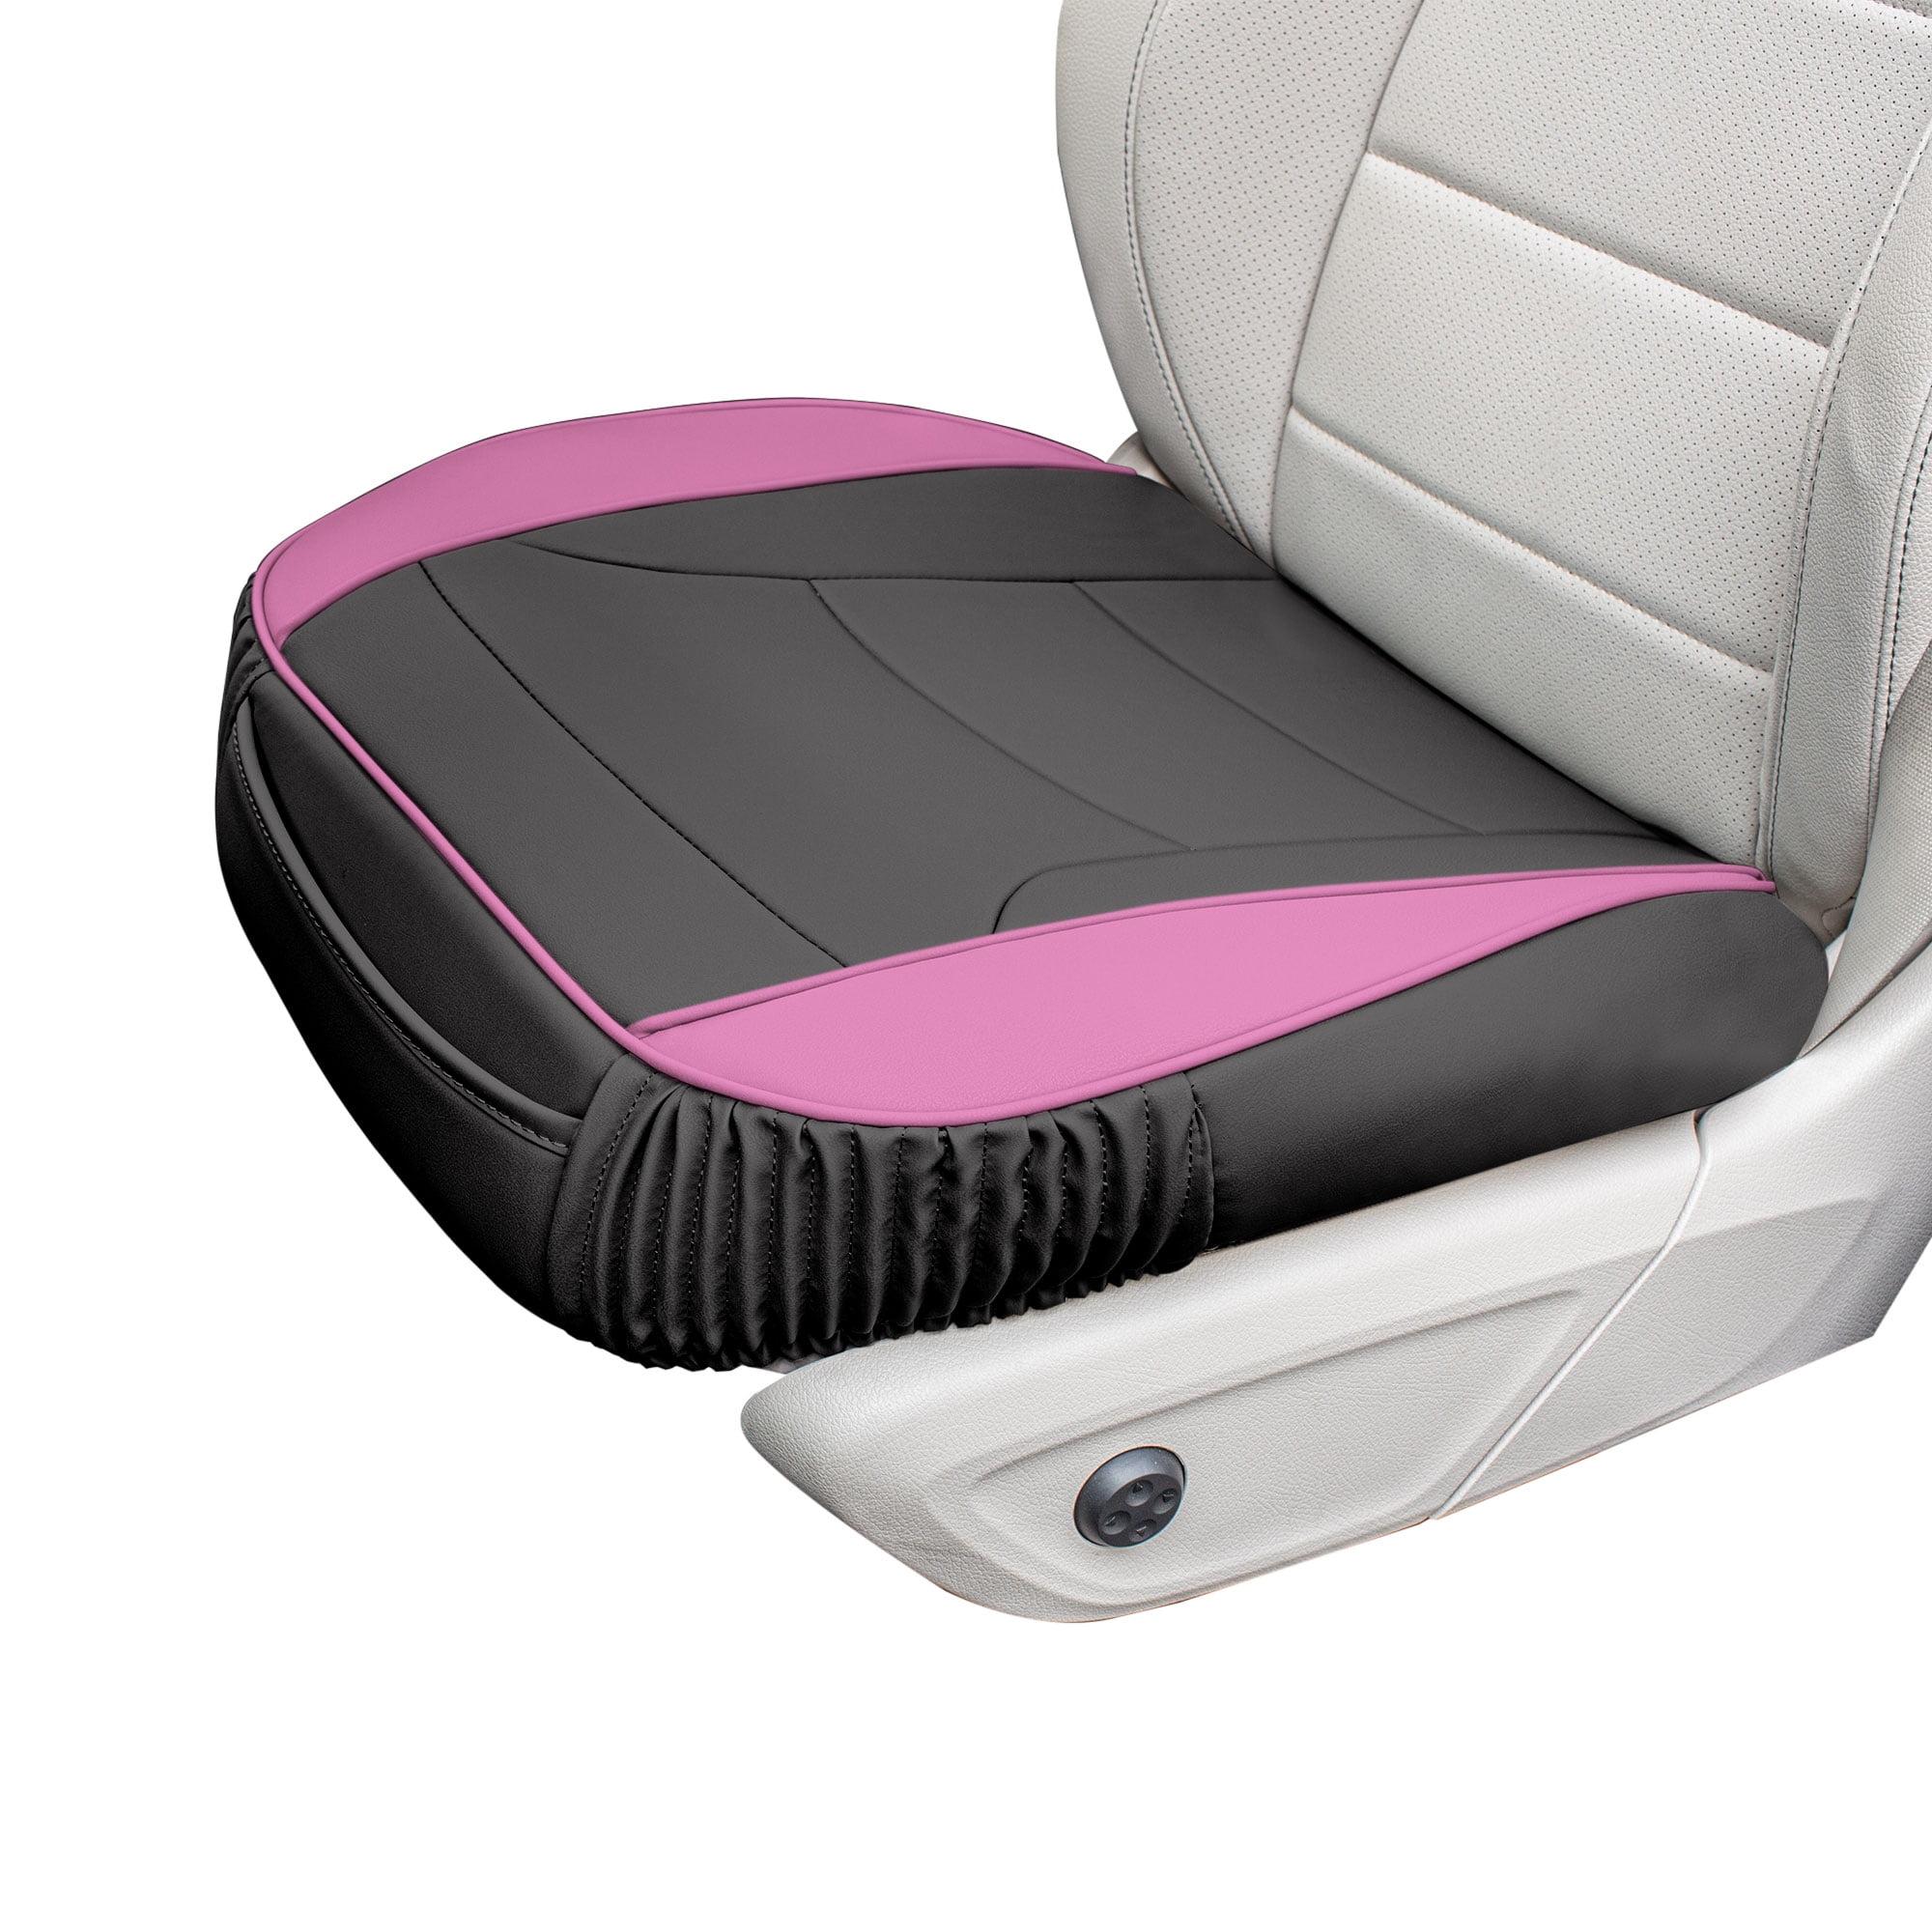 Car Seat Cushion, Custom Logo For Your Cars, Double Sided Seat